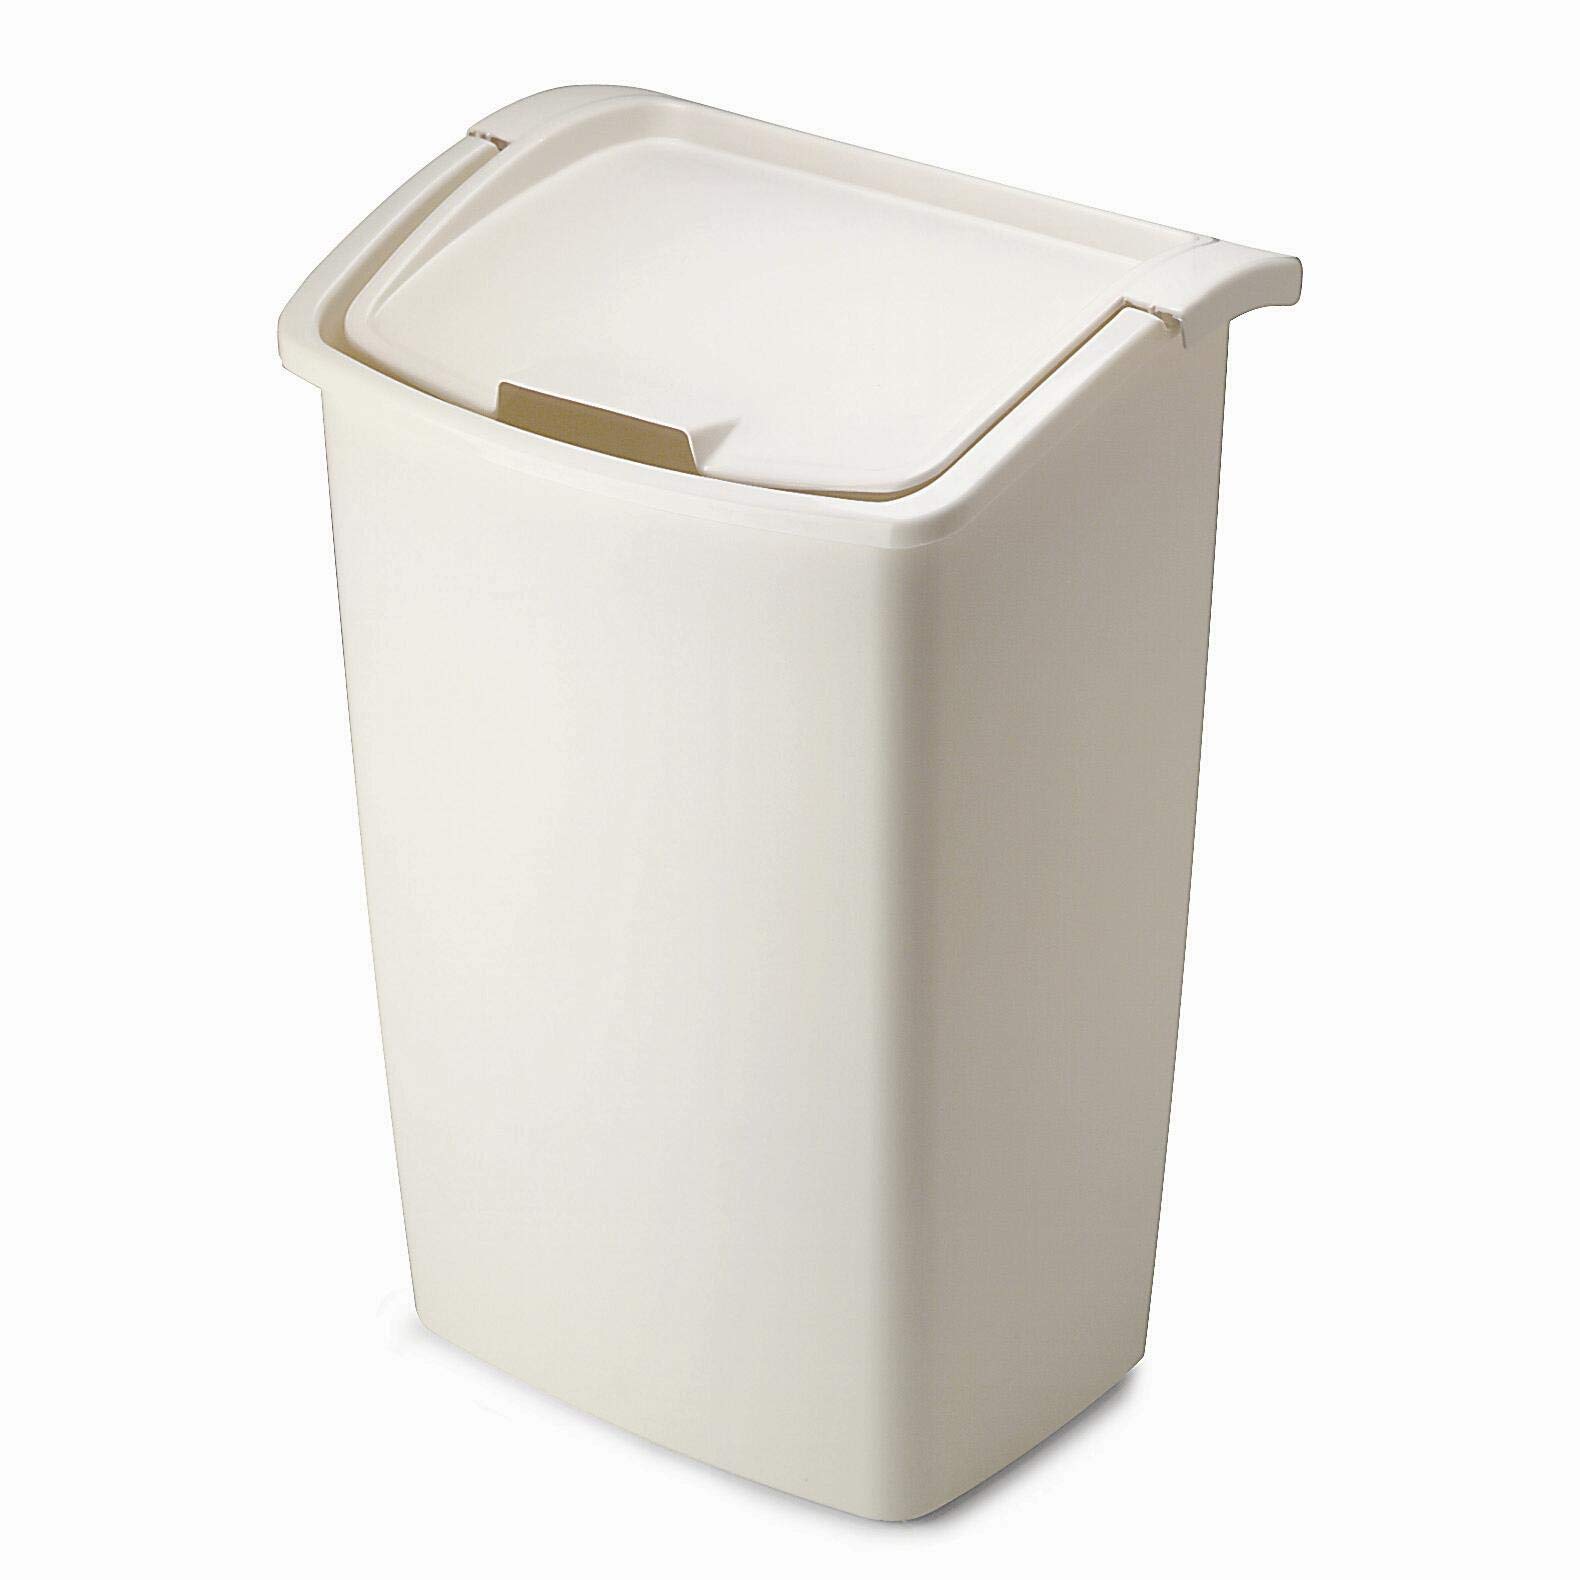 Book Cover Rubbermaid FG280300BISQU Dual-Action Swing Lid Trash Can for Home, Kitchen, and Bathroom Garbage, 11.3 Gallon, Off-White Bisque, 45-quart, Tan